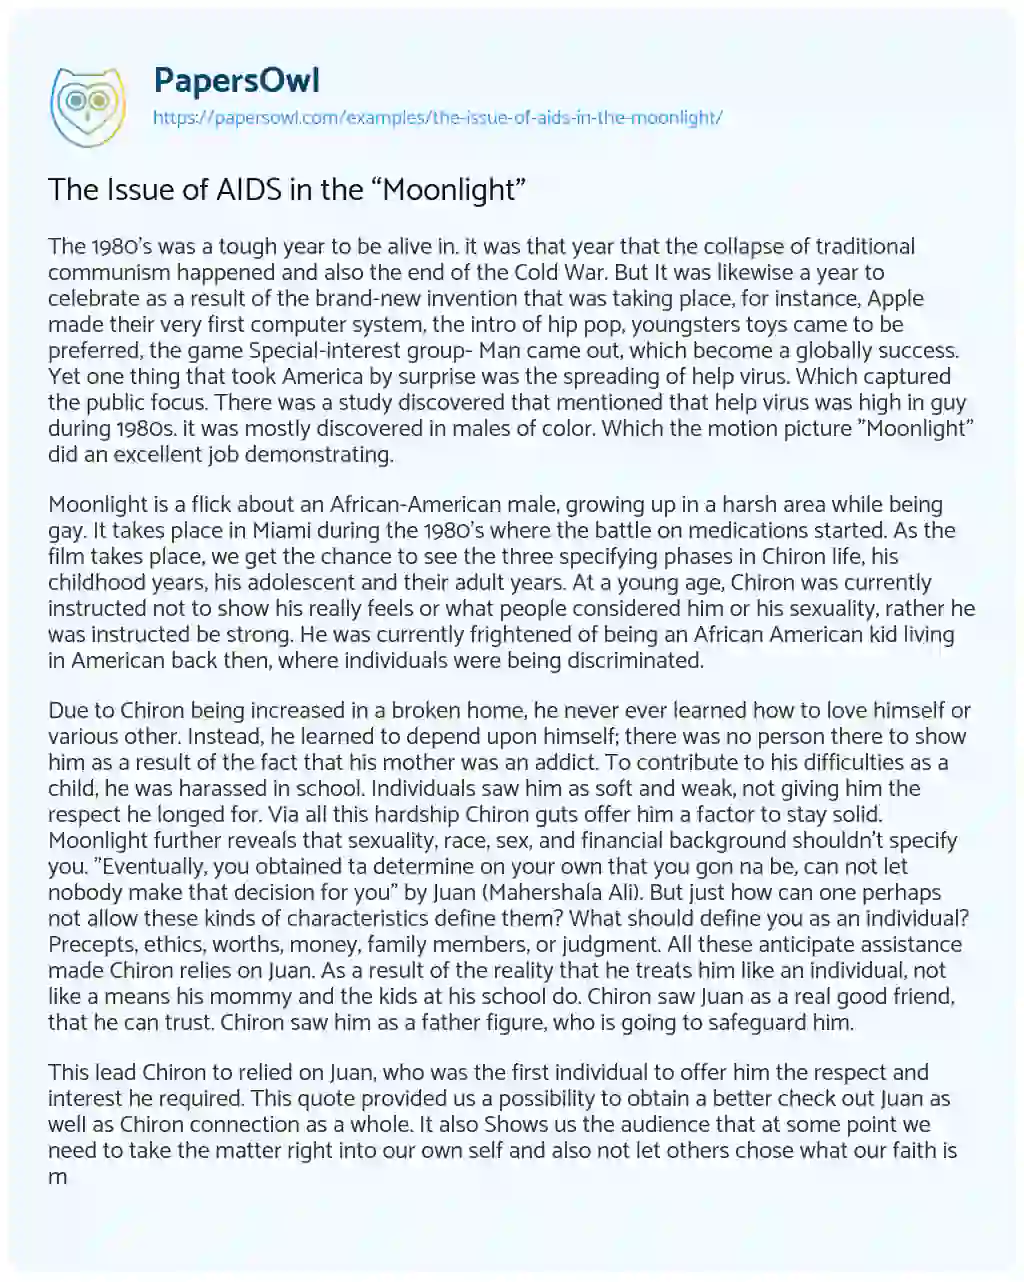 Essay on The Issue of AIDS in the “Moonlight”